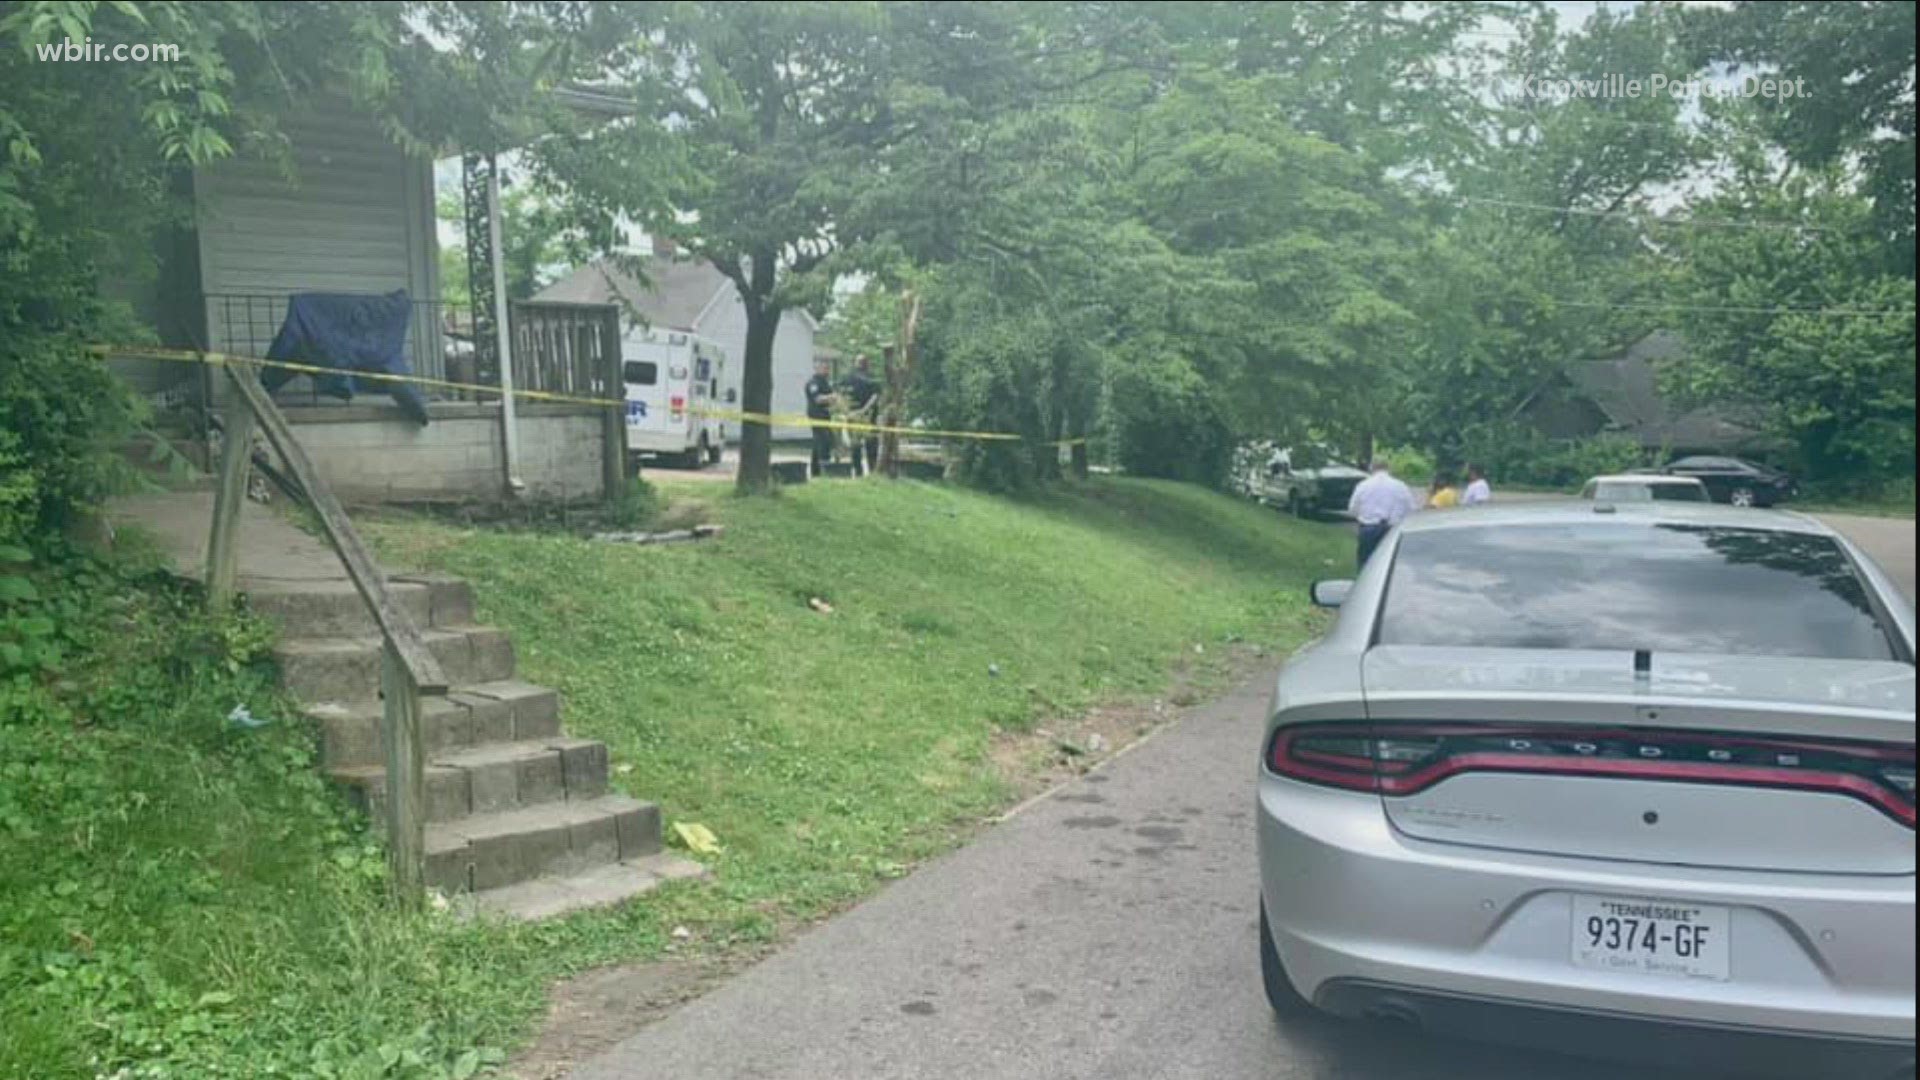 The man shot and killed Tuesday afternoon in a North Knoxville home had demanded money from occupants while carrying a gun, the Knoxville Police Department said.